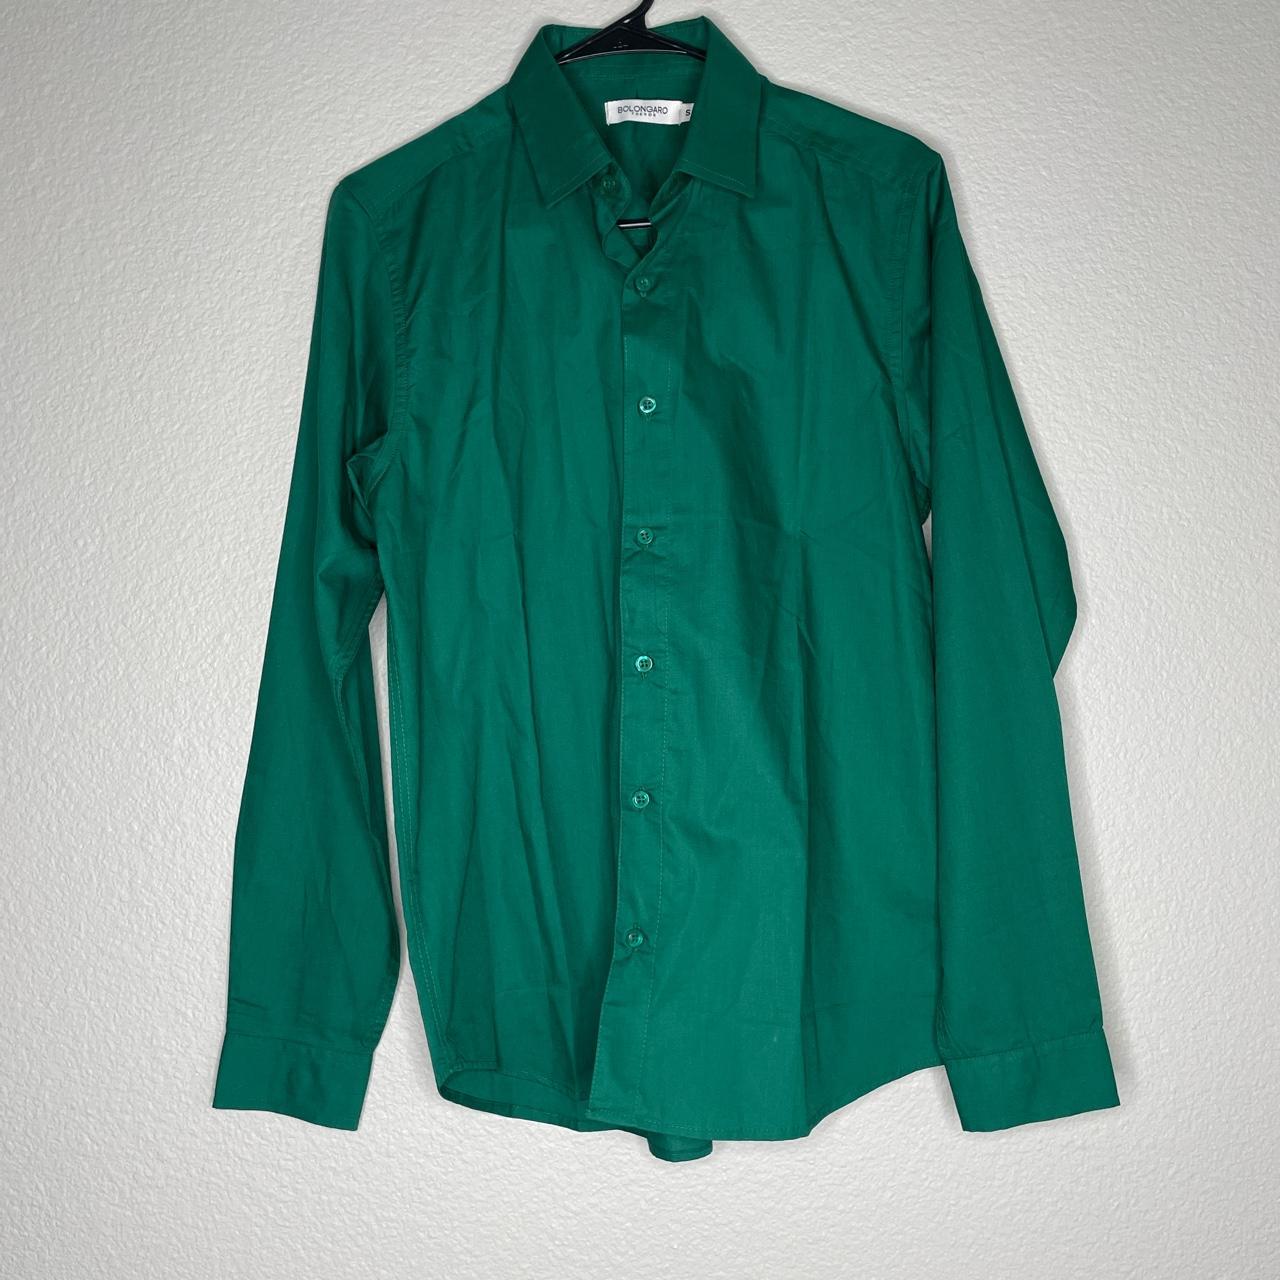 Product Image 1 - #bolongarotrevor #small #green #button up